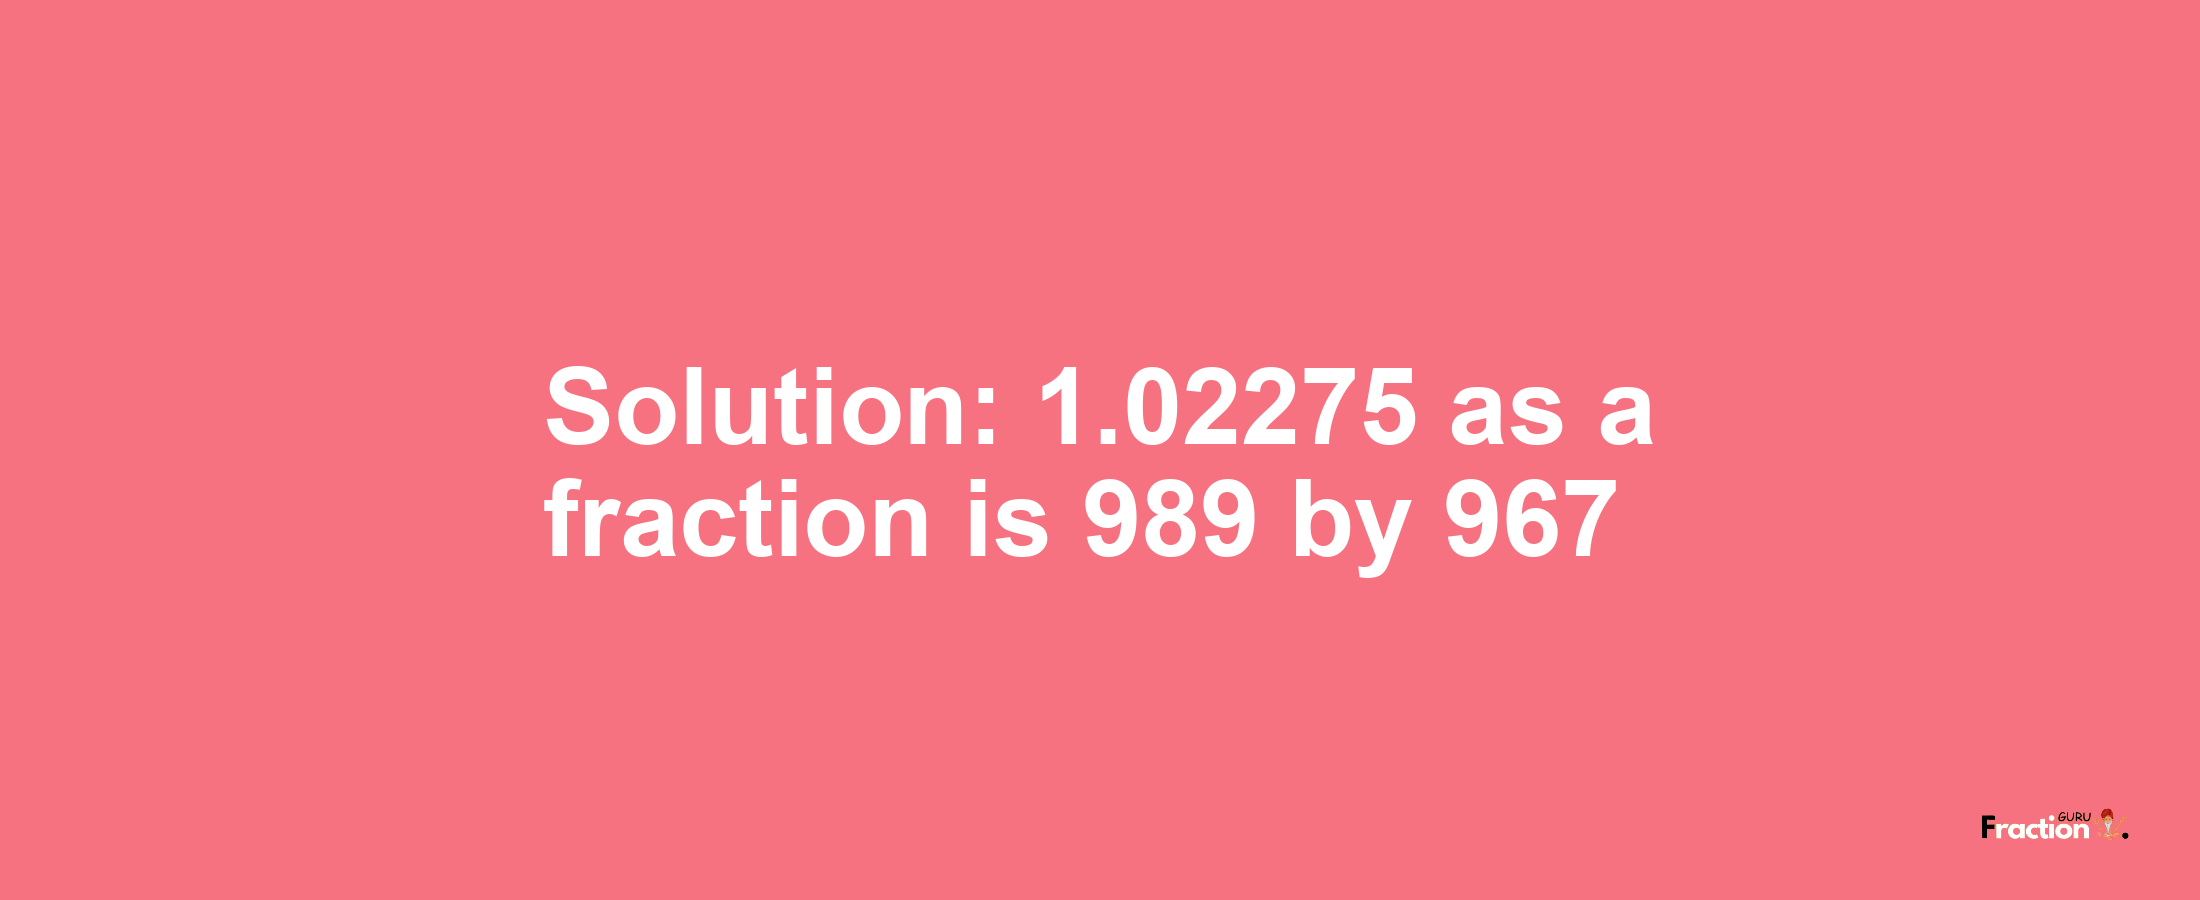 Solution:1.02275 as a fraction is 989/967